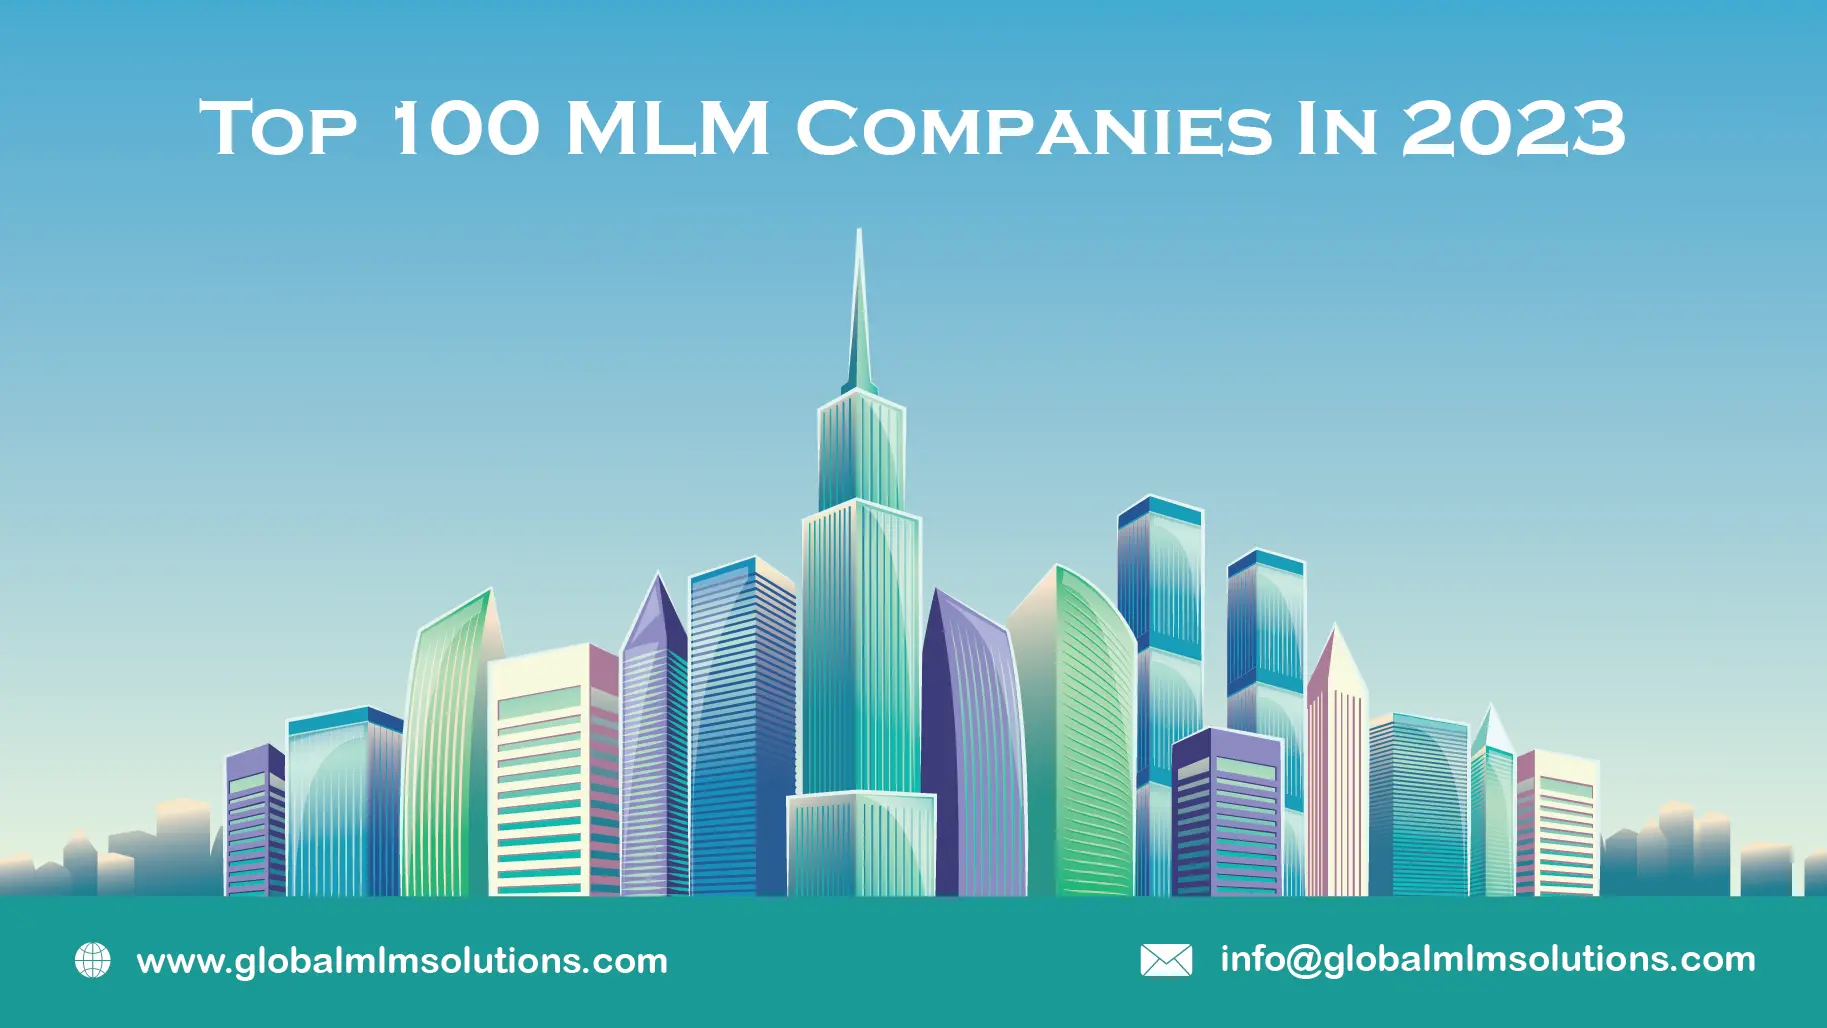 Top 100 MLM Companies in 2022